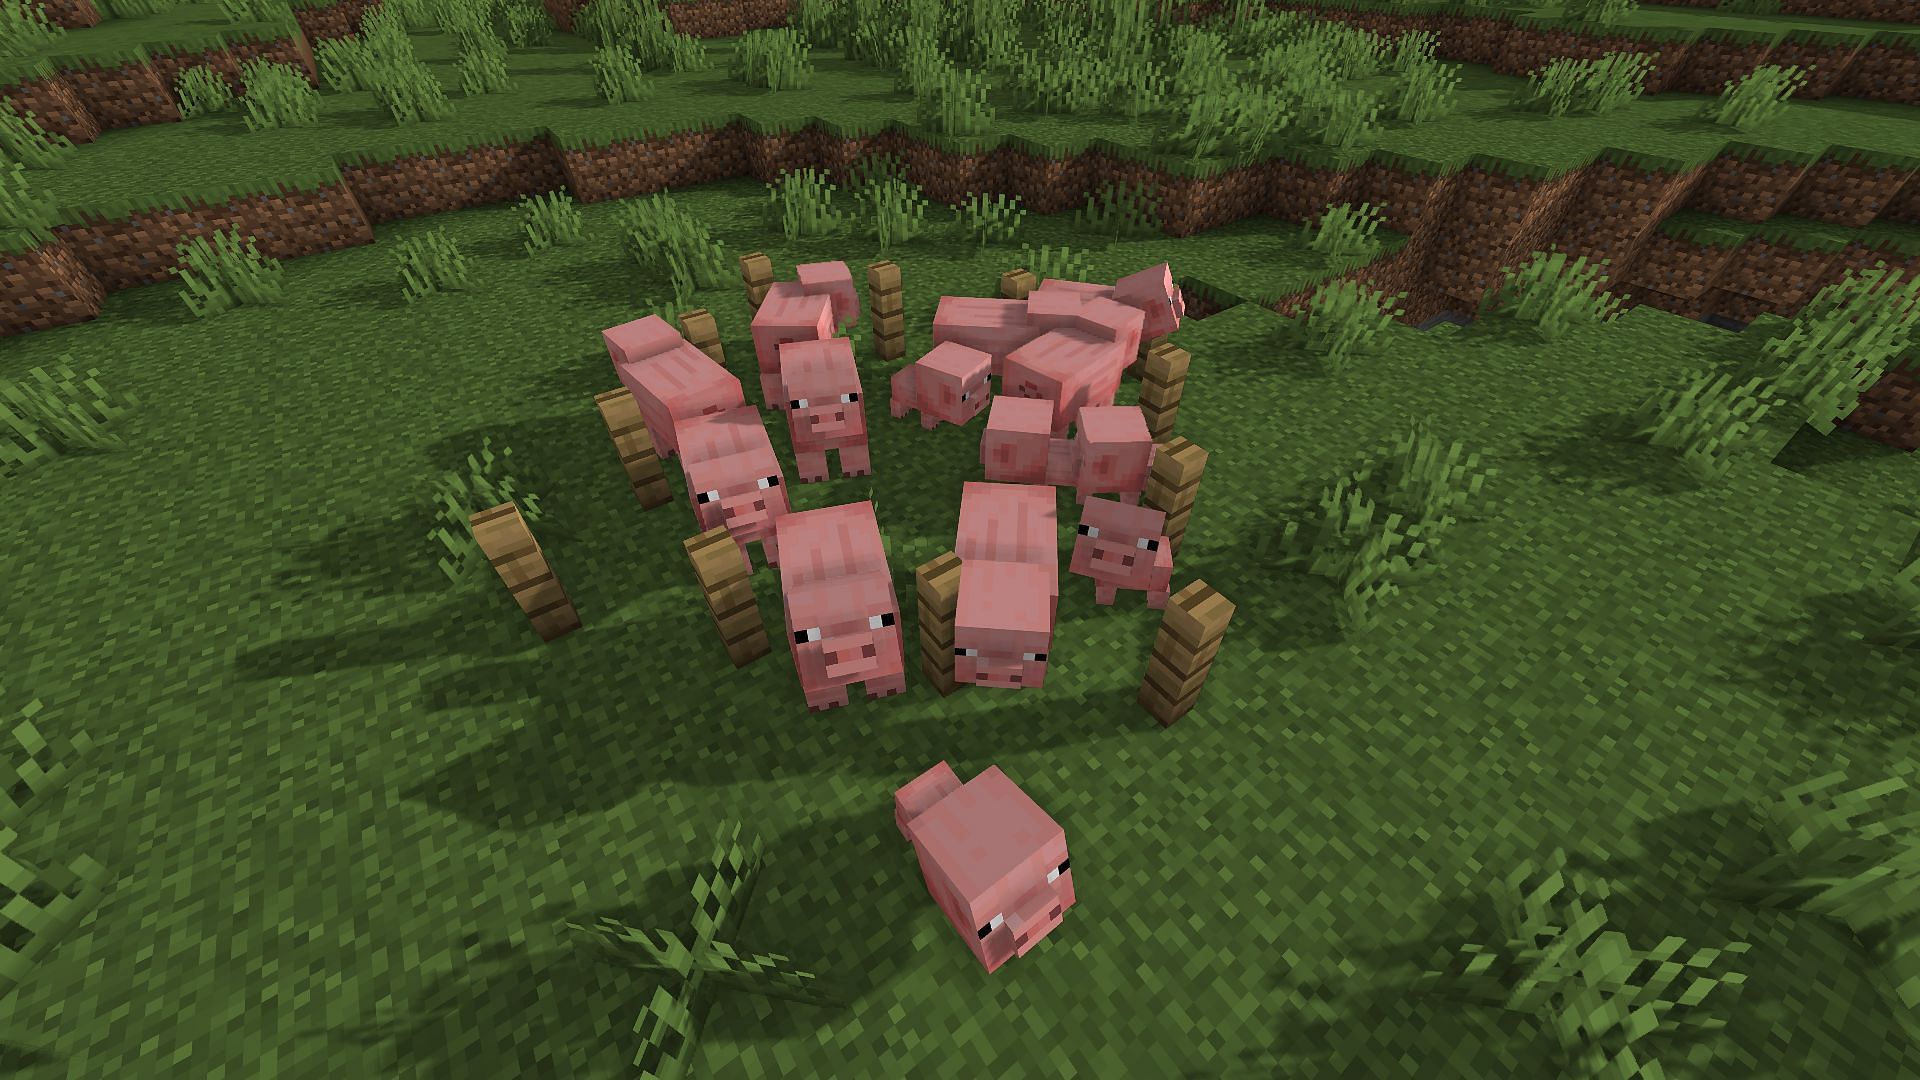 An example of a diagonal fence pig pen (Image via Minecraft)